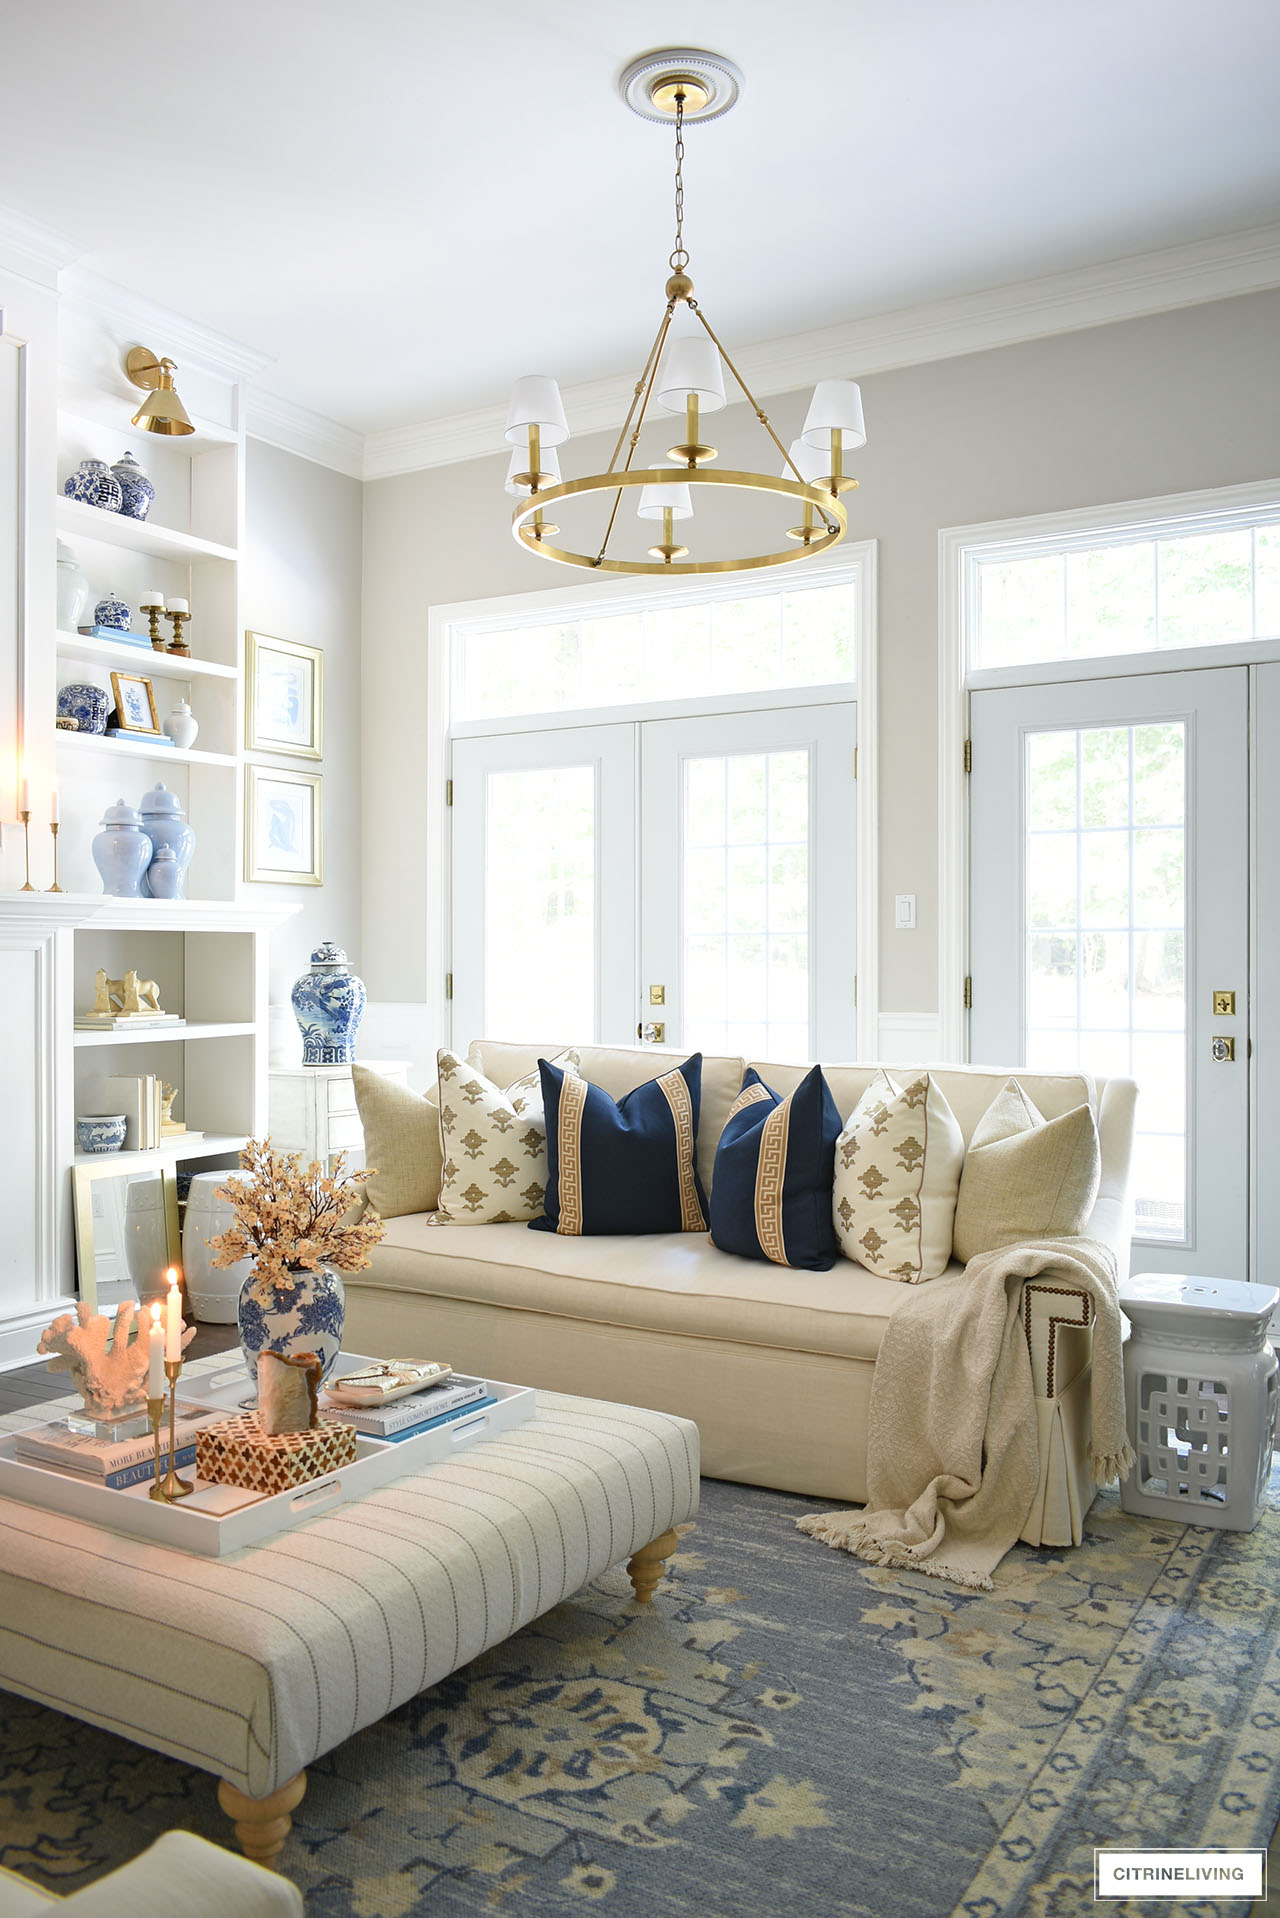 Gorgeous fall living room decorated for fall with rich navy, tan, gold and brown accents.